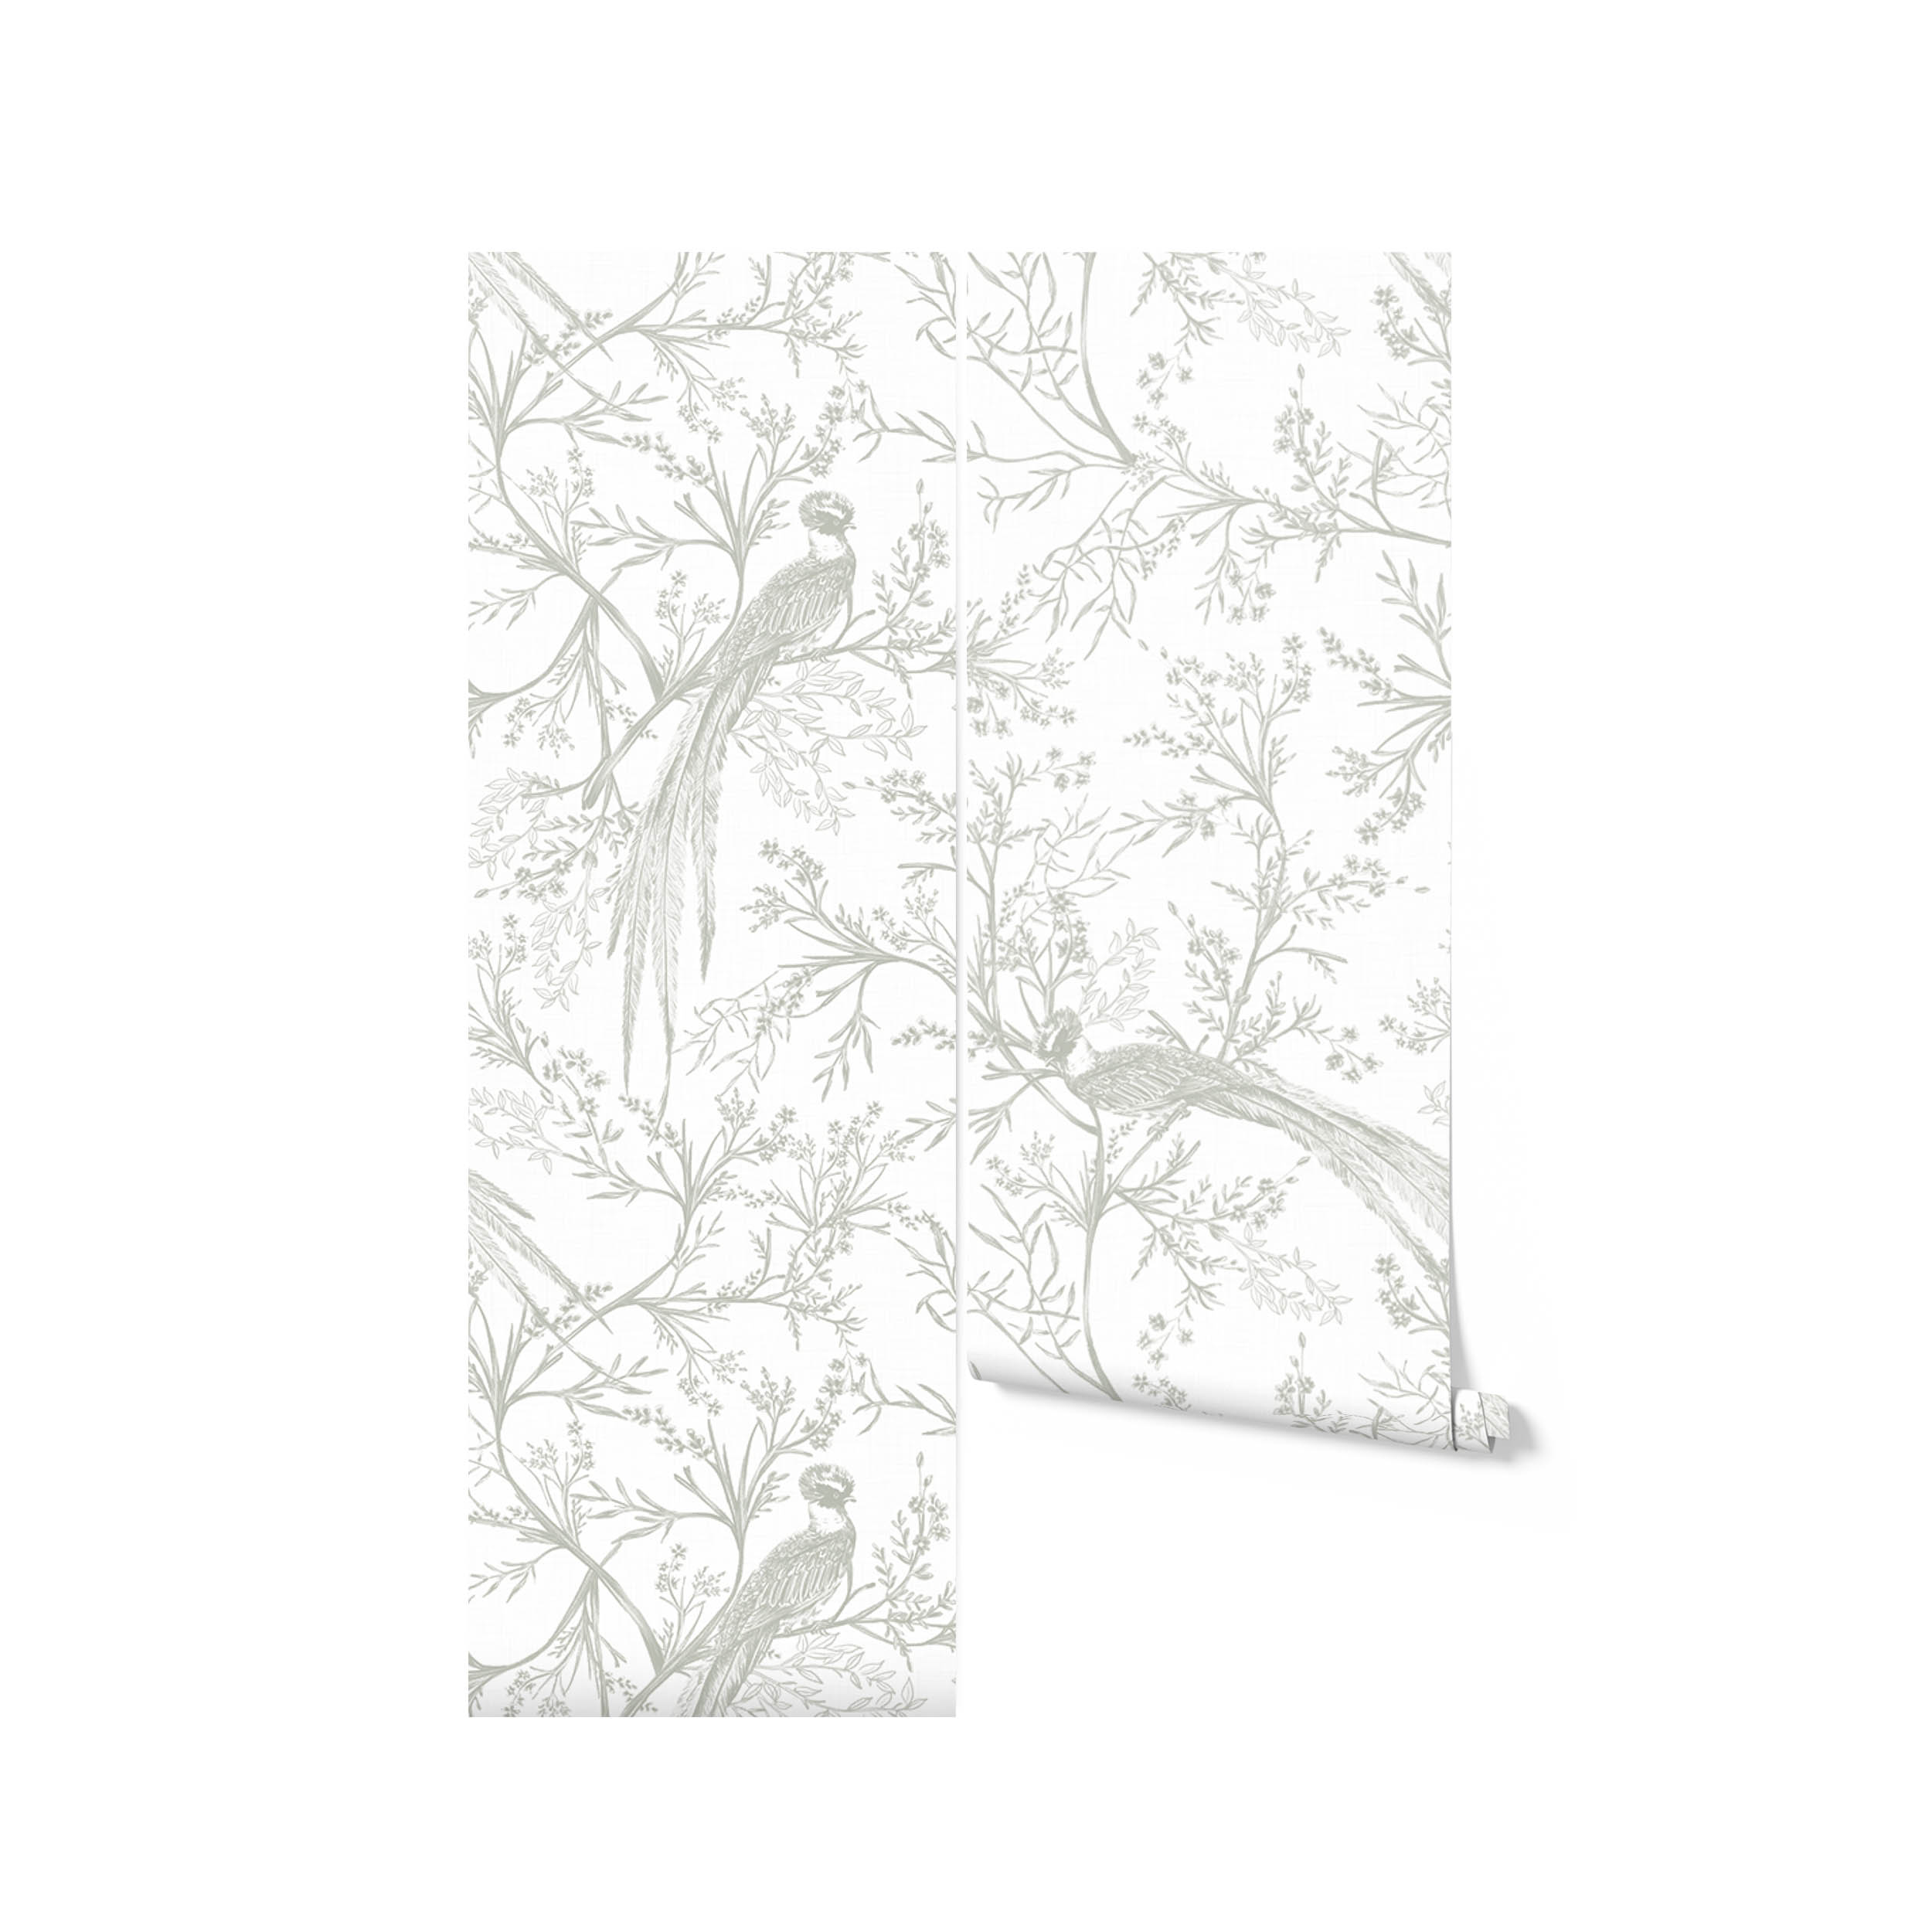 An image of a roll of Oriental Garden Wallpaper, displaying the elegant gray and white botanical pattern with birds. This design is perfect for creating a serene and inviting environment in any room, blending classic elegance with natural motifs.